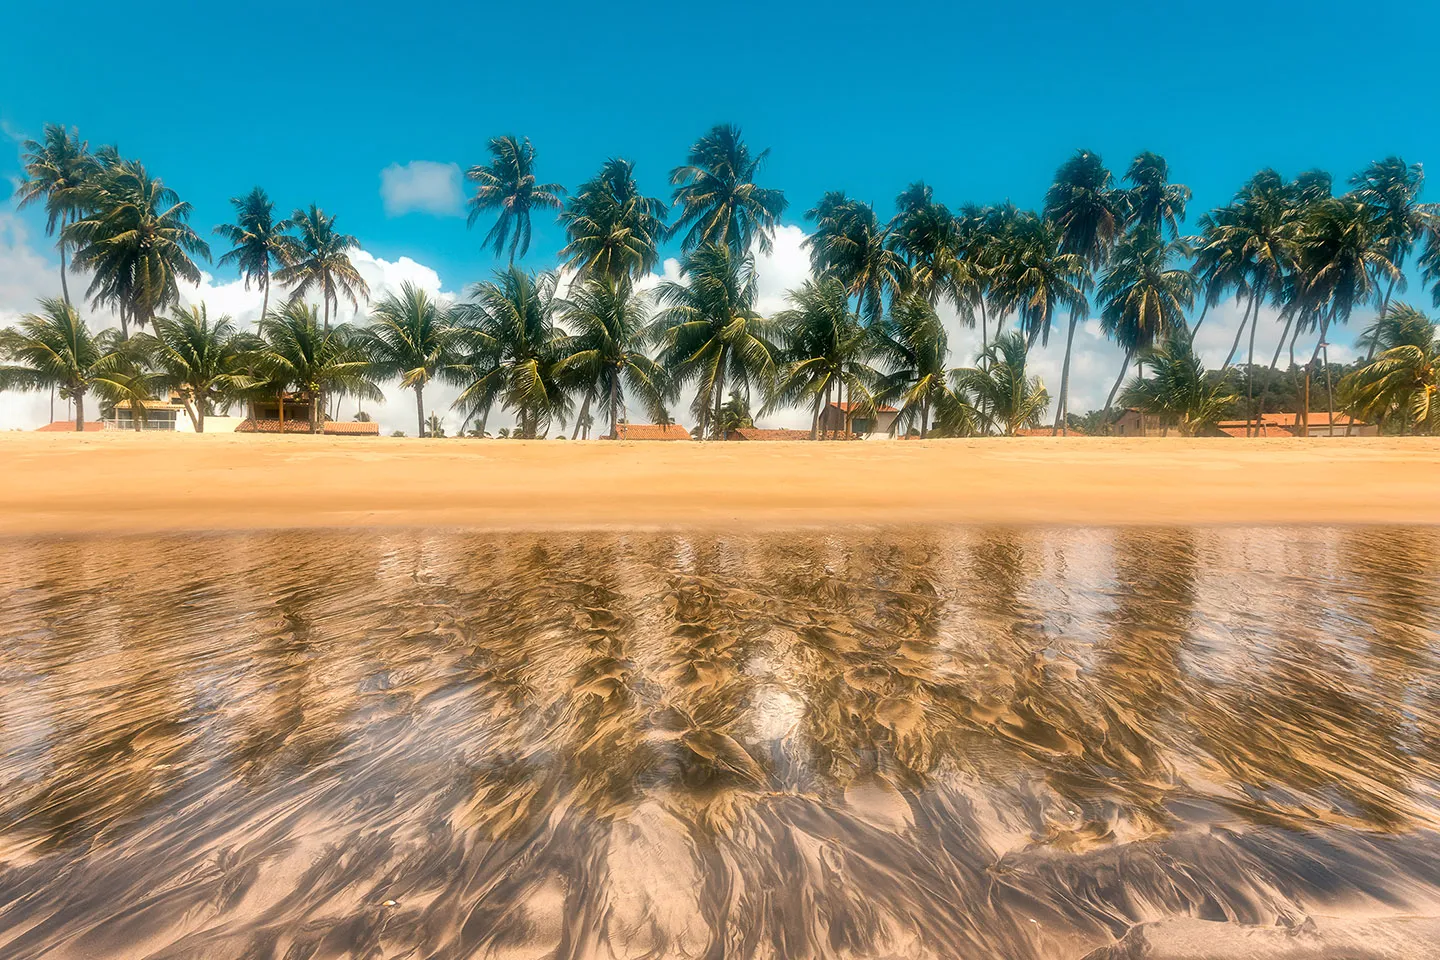 Beach view showing palm trees